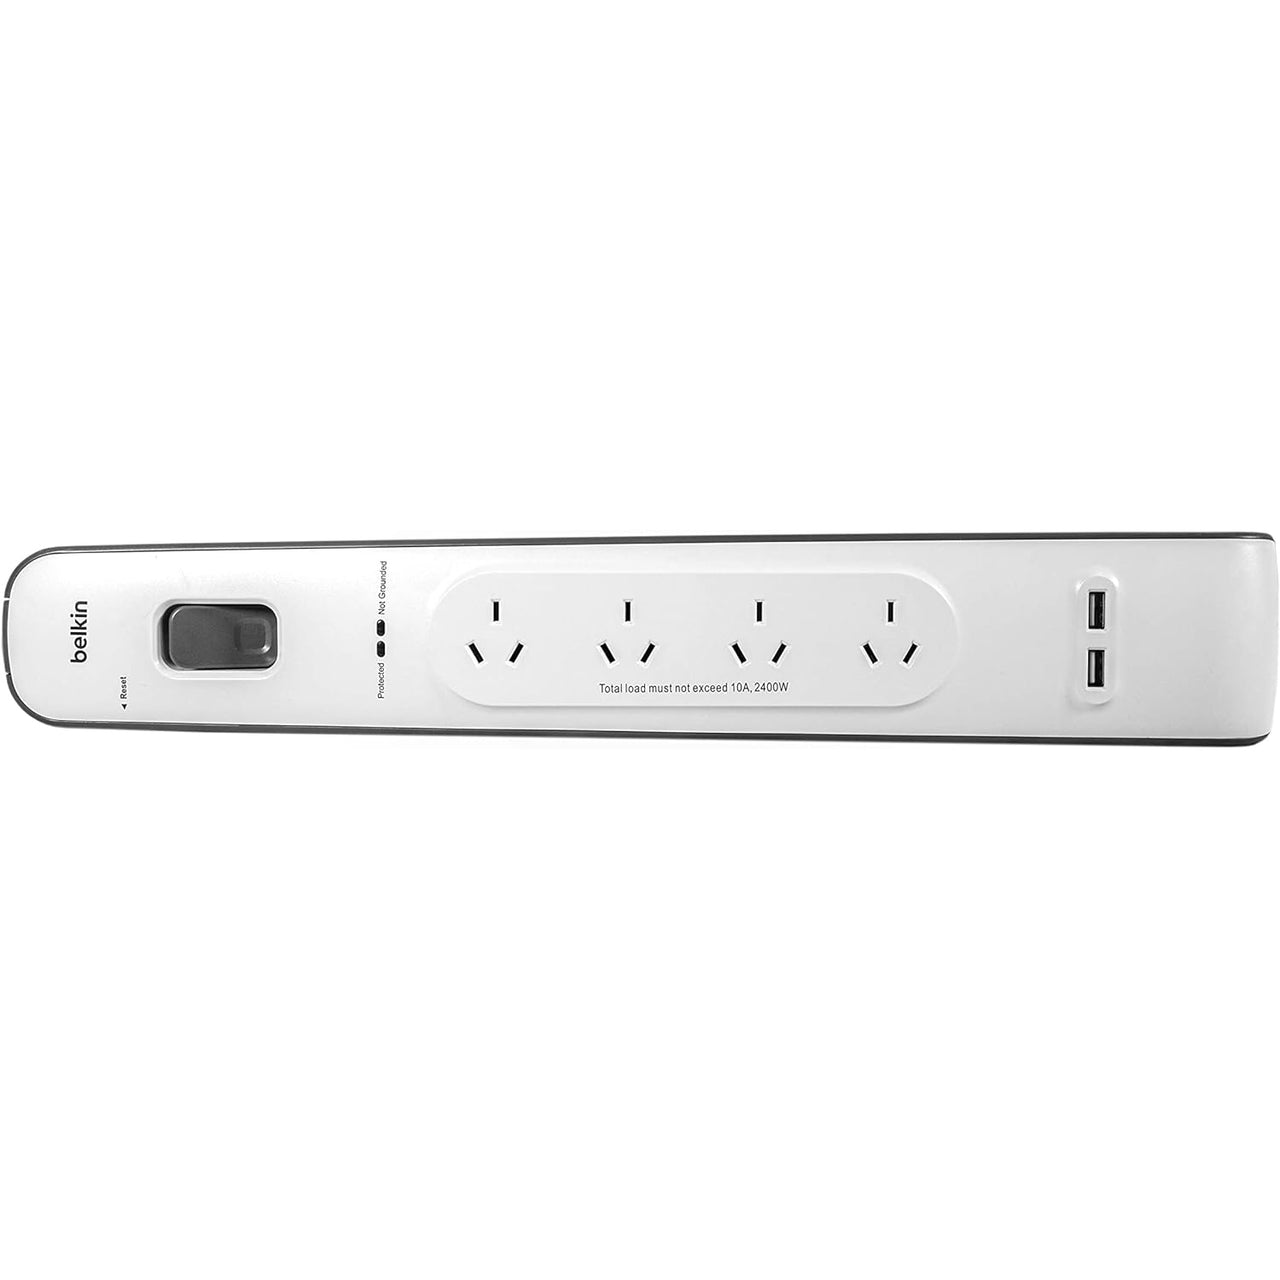 Belkin 4-Outlet Surge Protector Powerboard with 2Meter Lead 2 x USB Charging Ports  - White/Grey